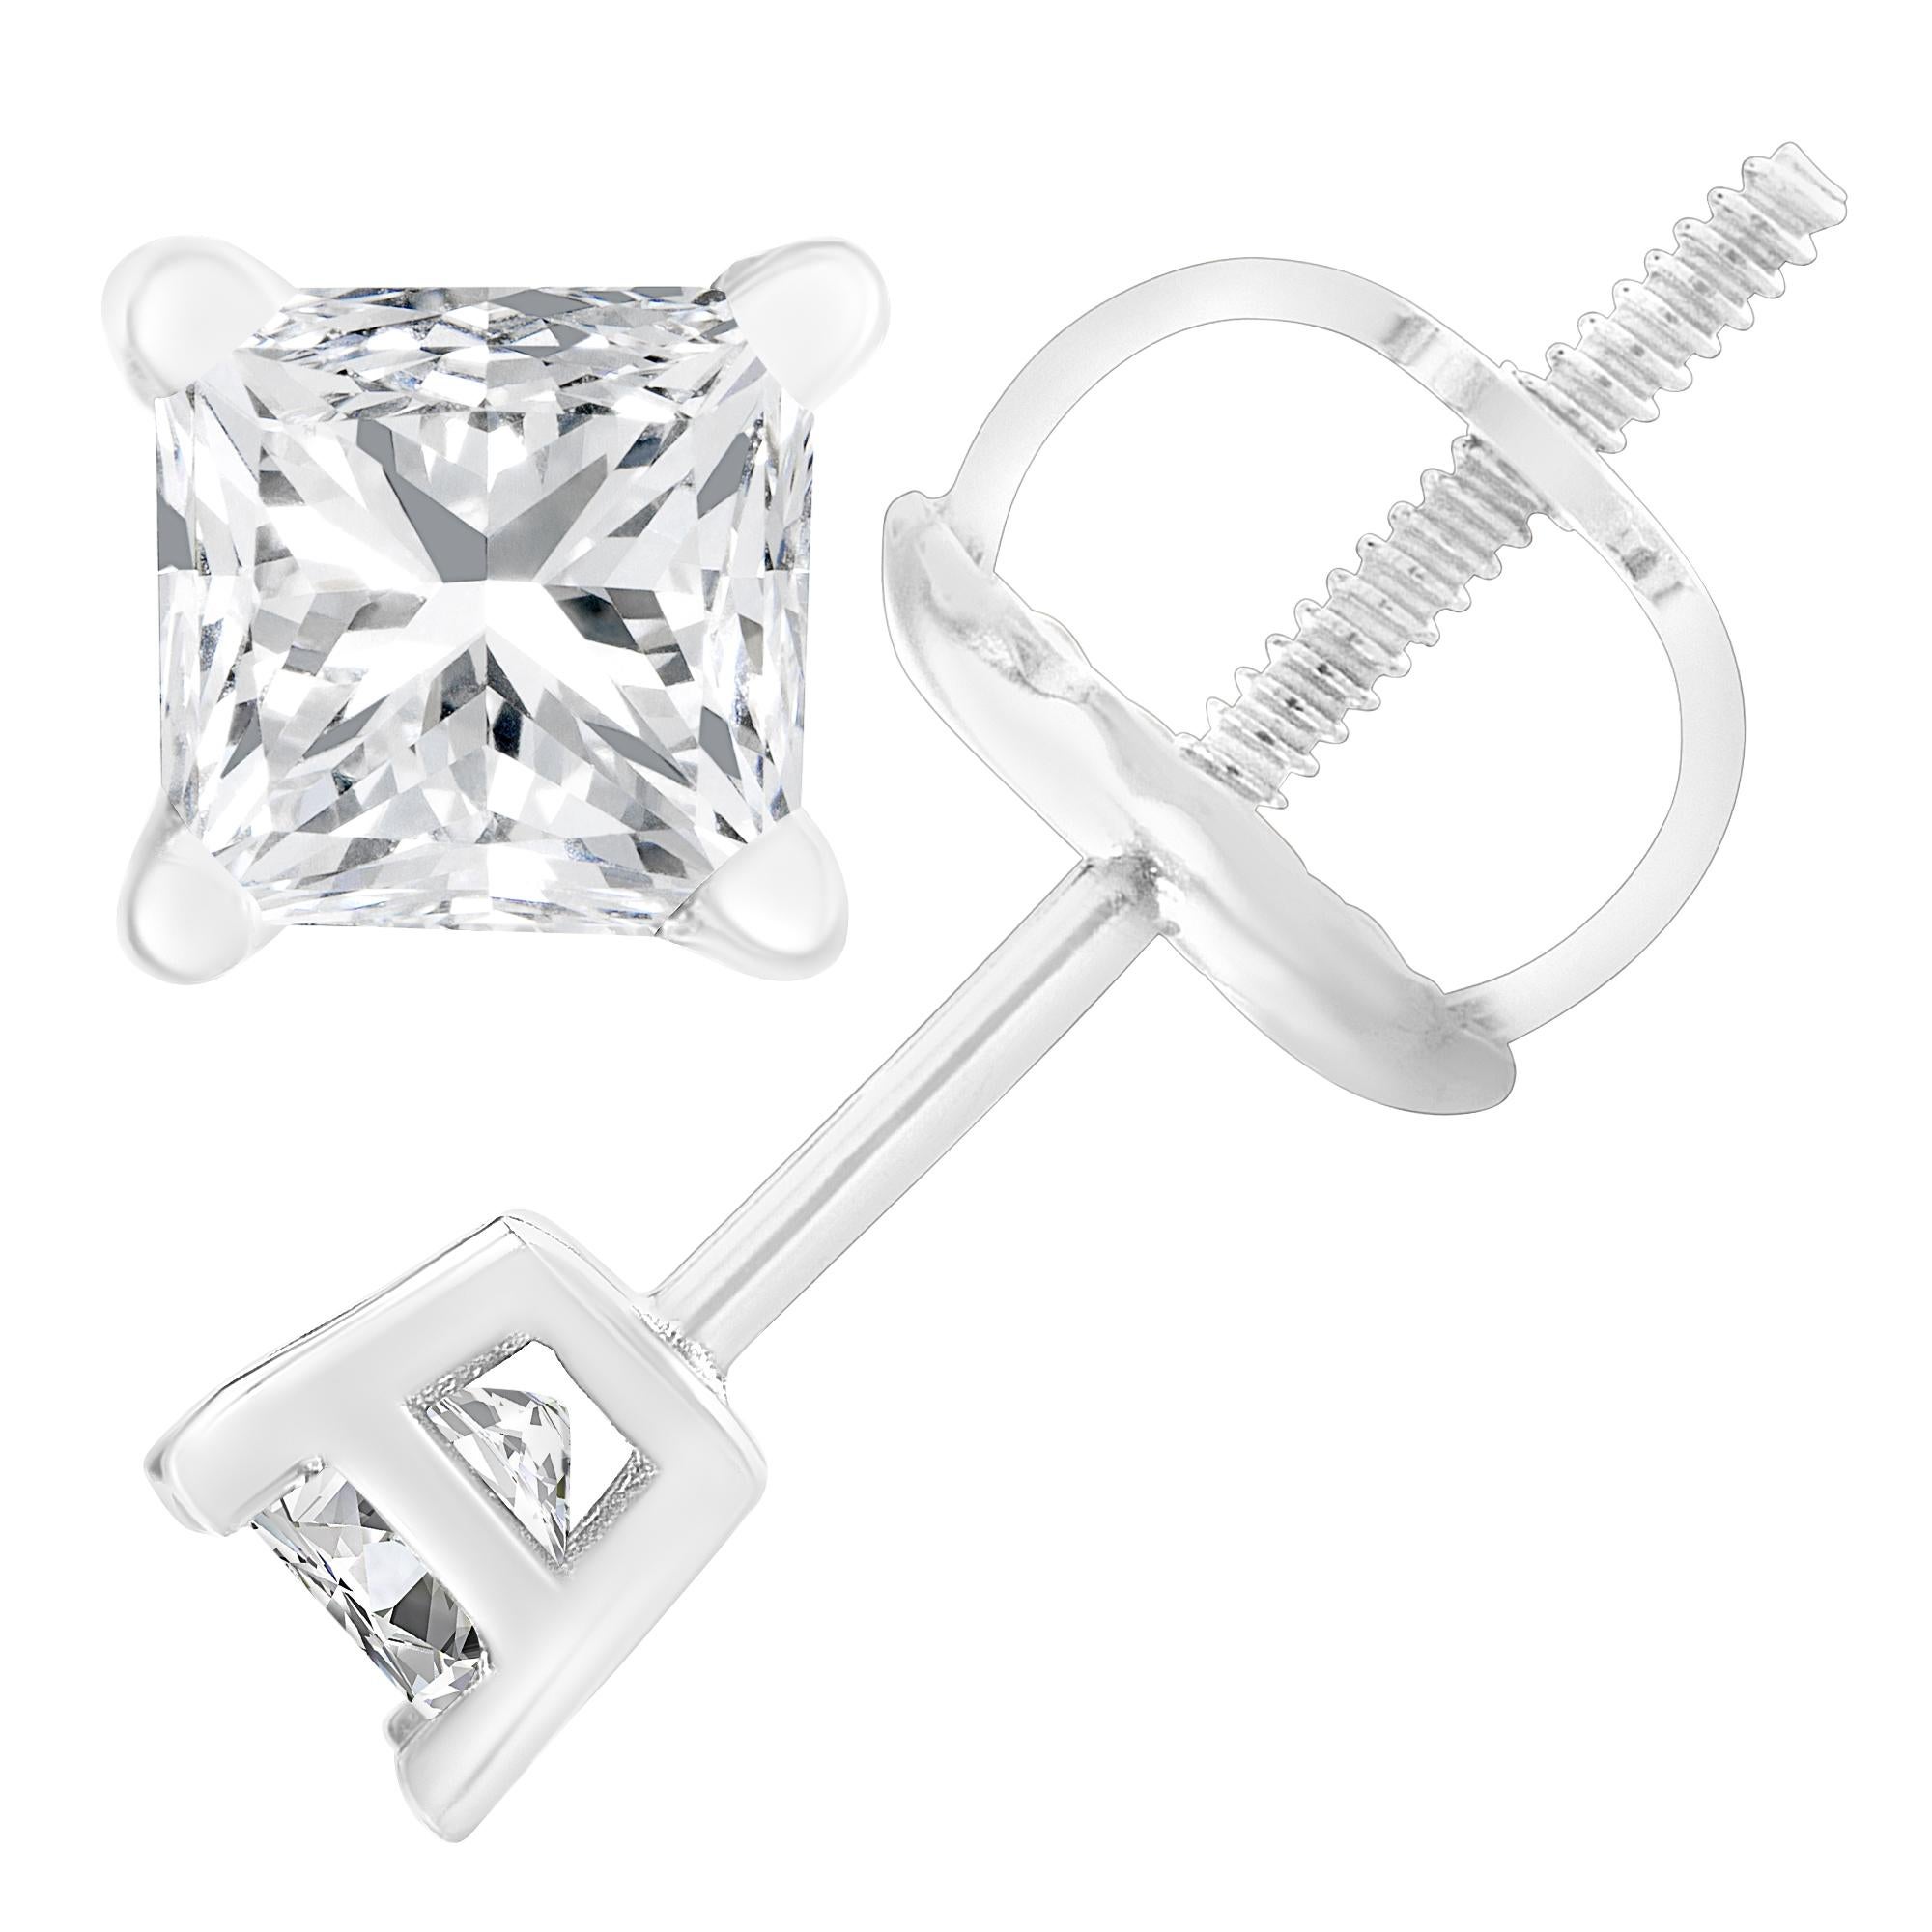 Elegant and classic, these solitaire studs are beautifully set in the finest 18k white gold and shine with a natural, prong-set diamond each. The diamonds are princess-cut and have a total carat weight of 1.0 cttw. These earrings are the perfect